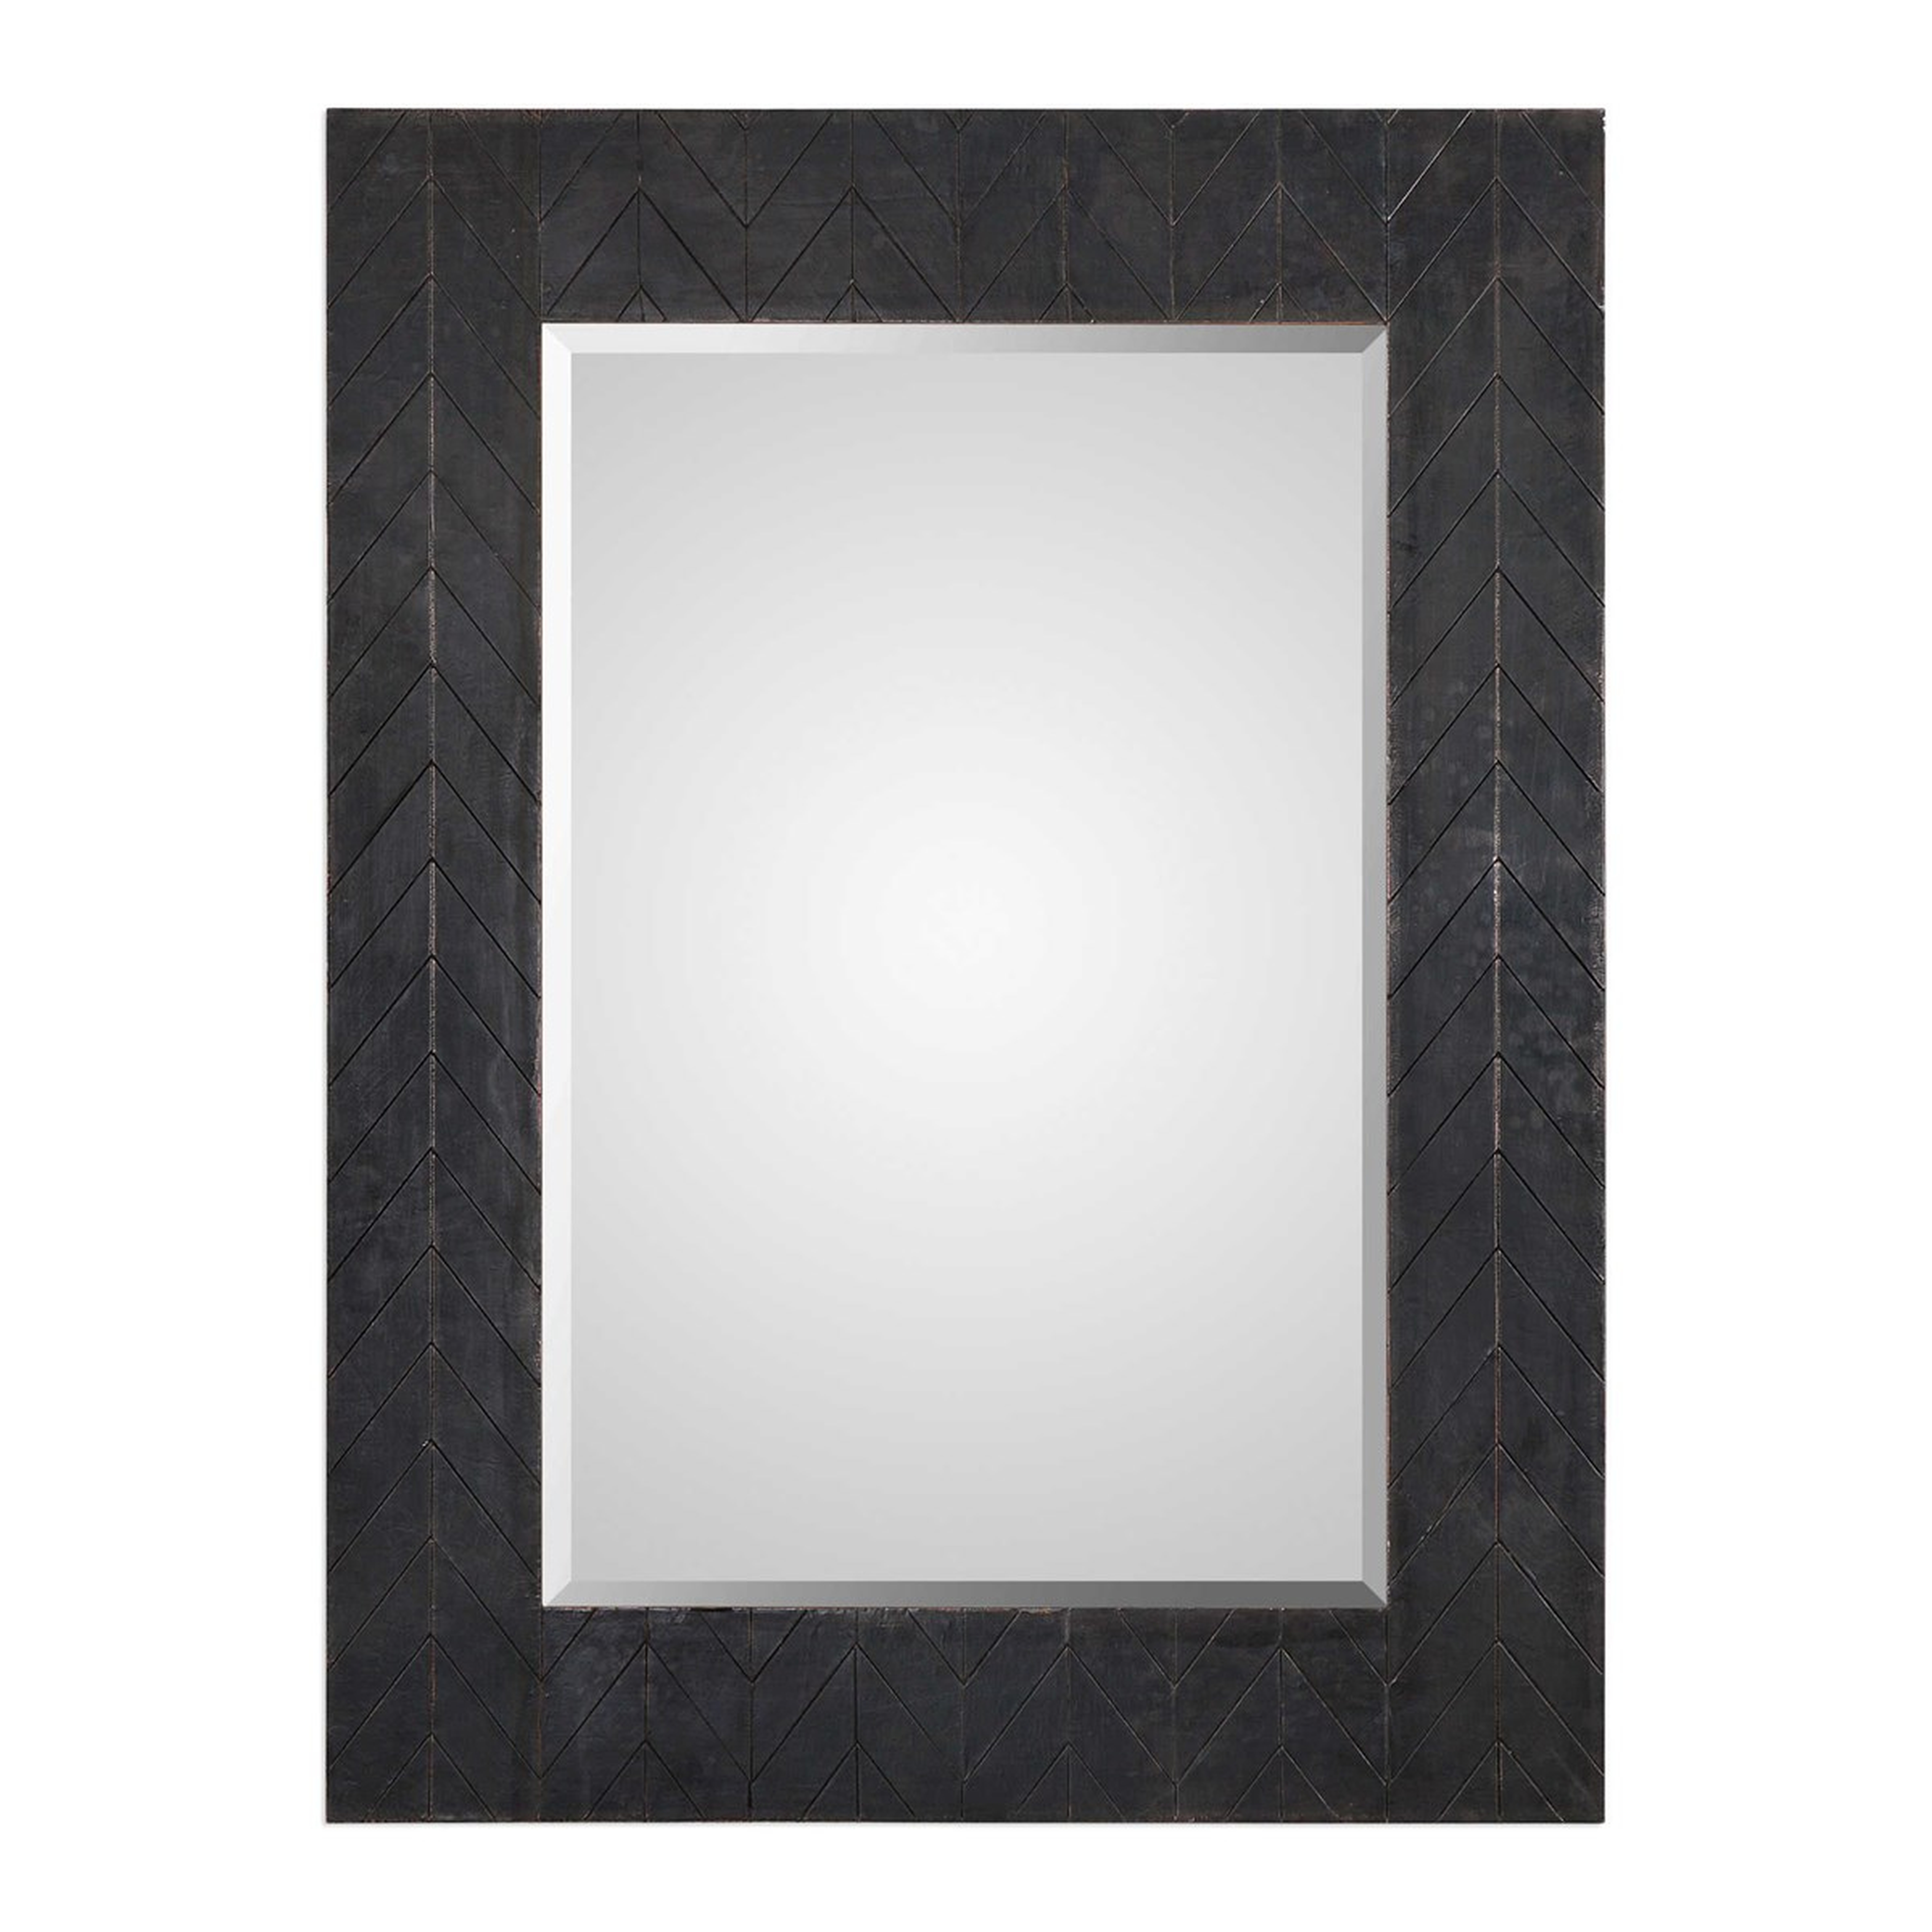 CAPRIONE MIRROR - Hudsonhill Foundry